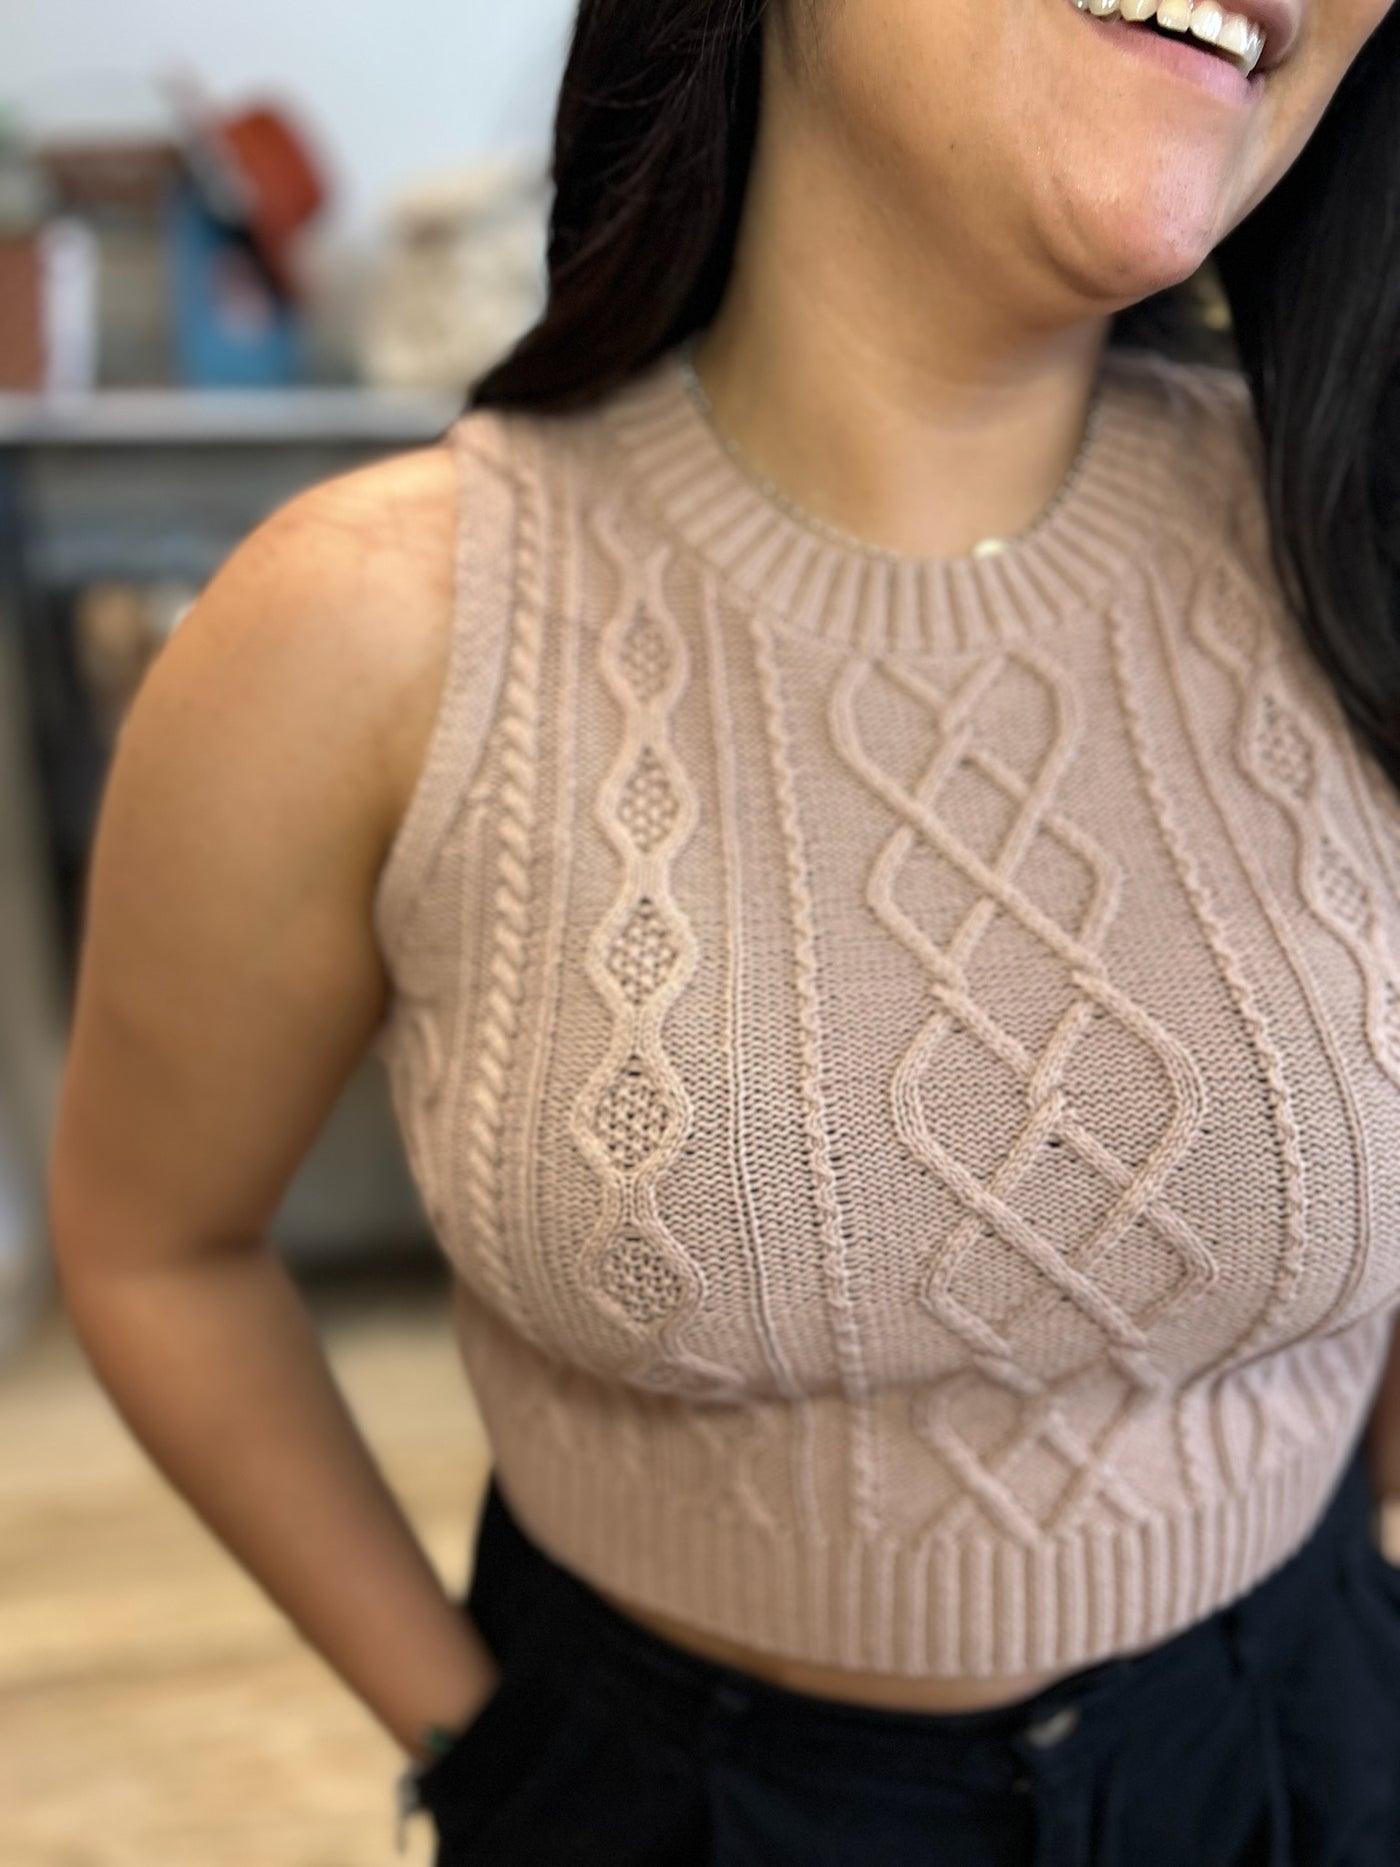 The Gianna Cable Knit Crop Sleeveless Top Vest